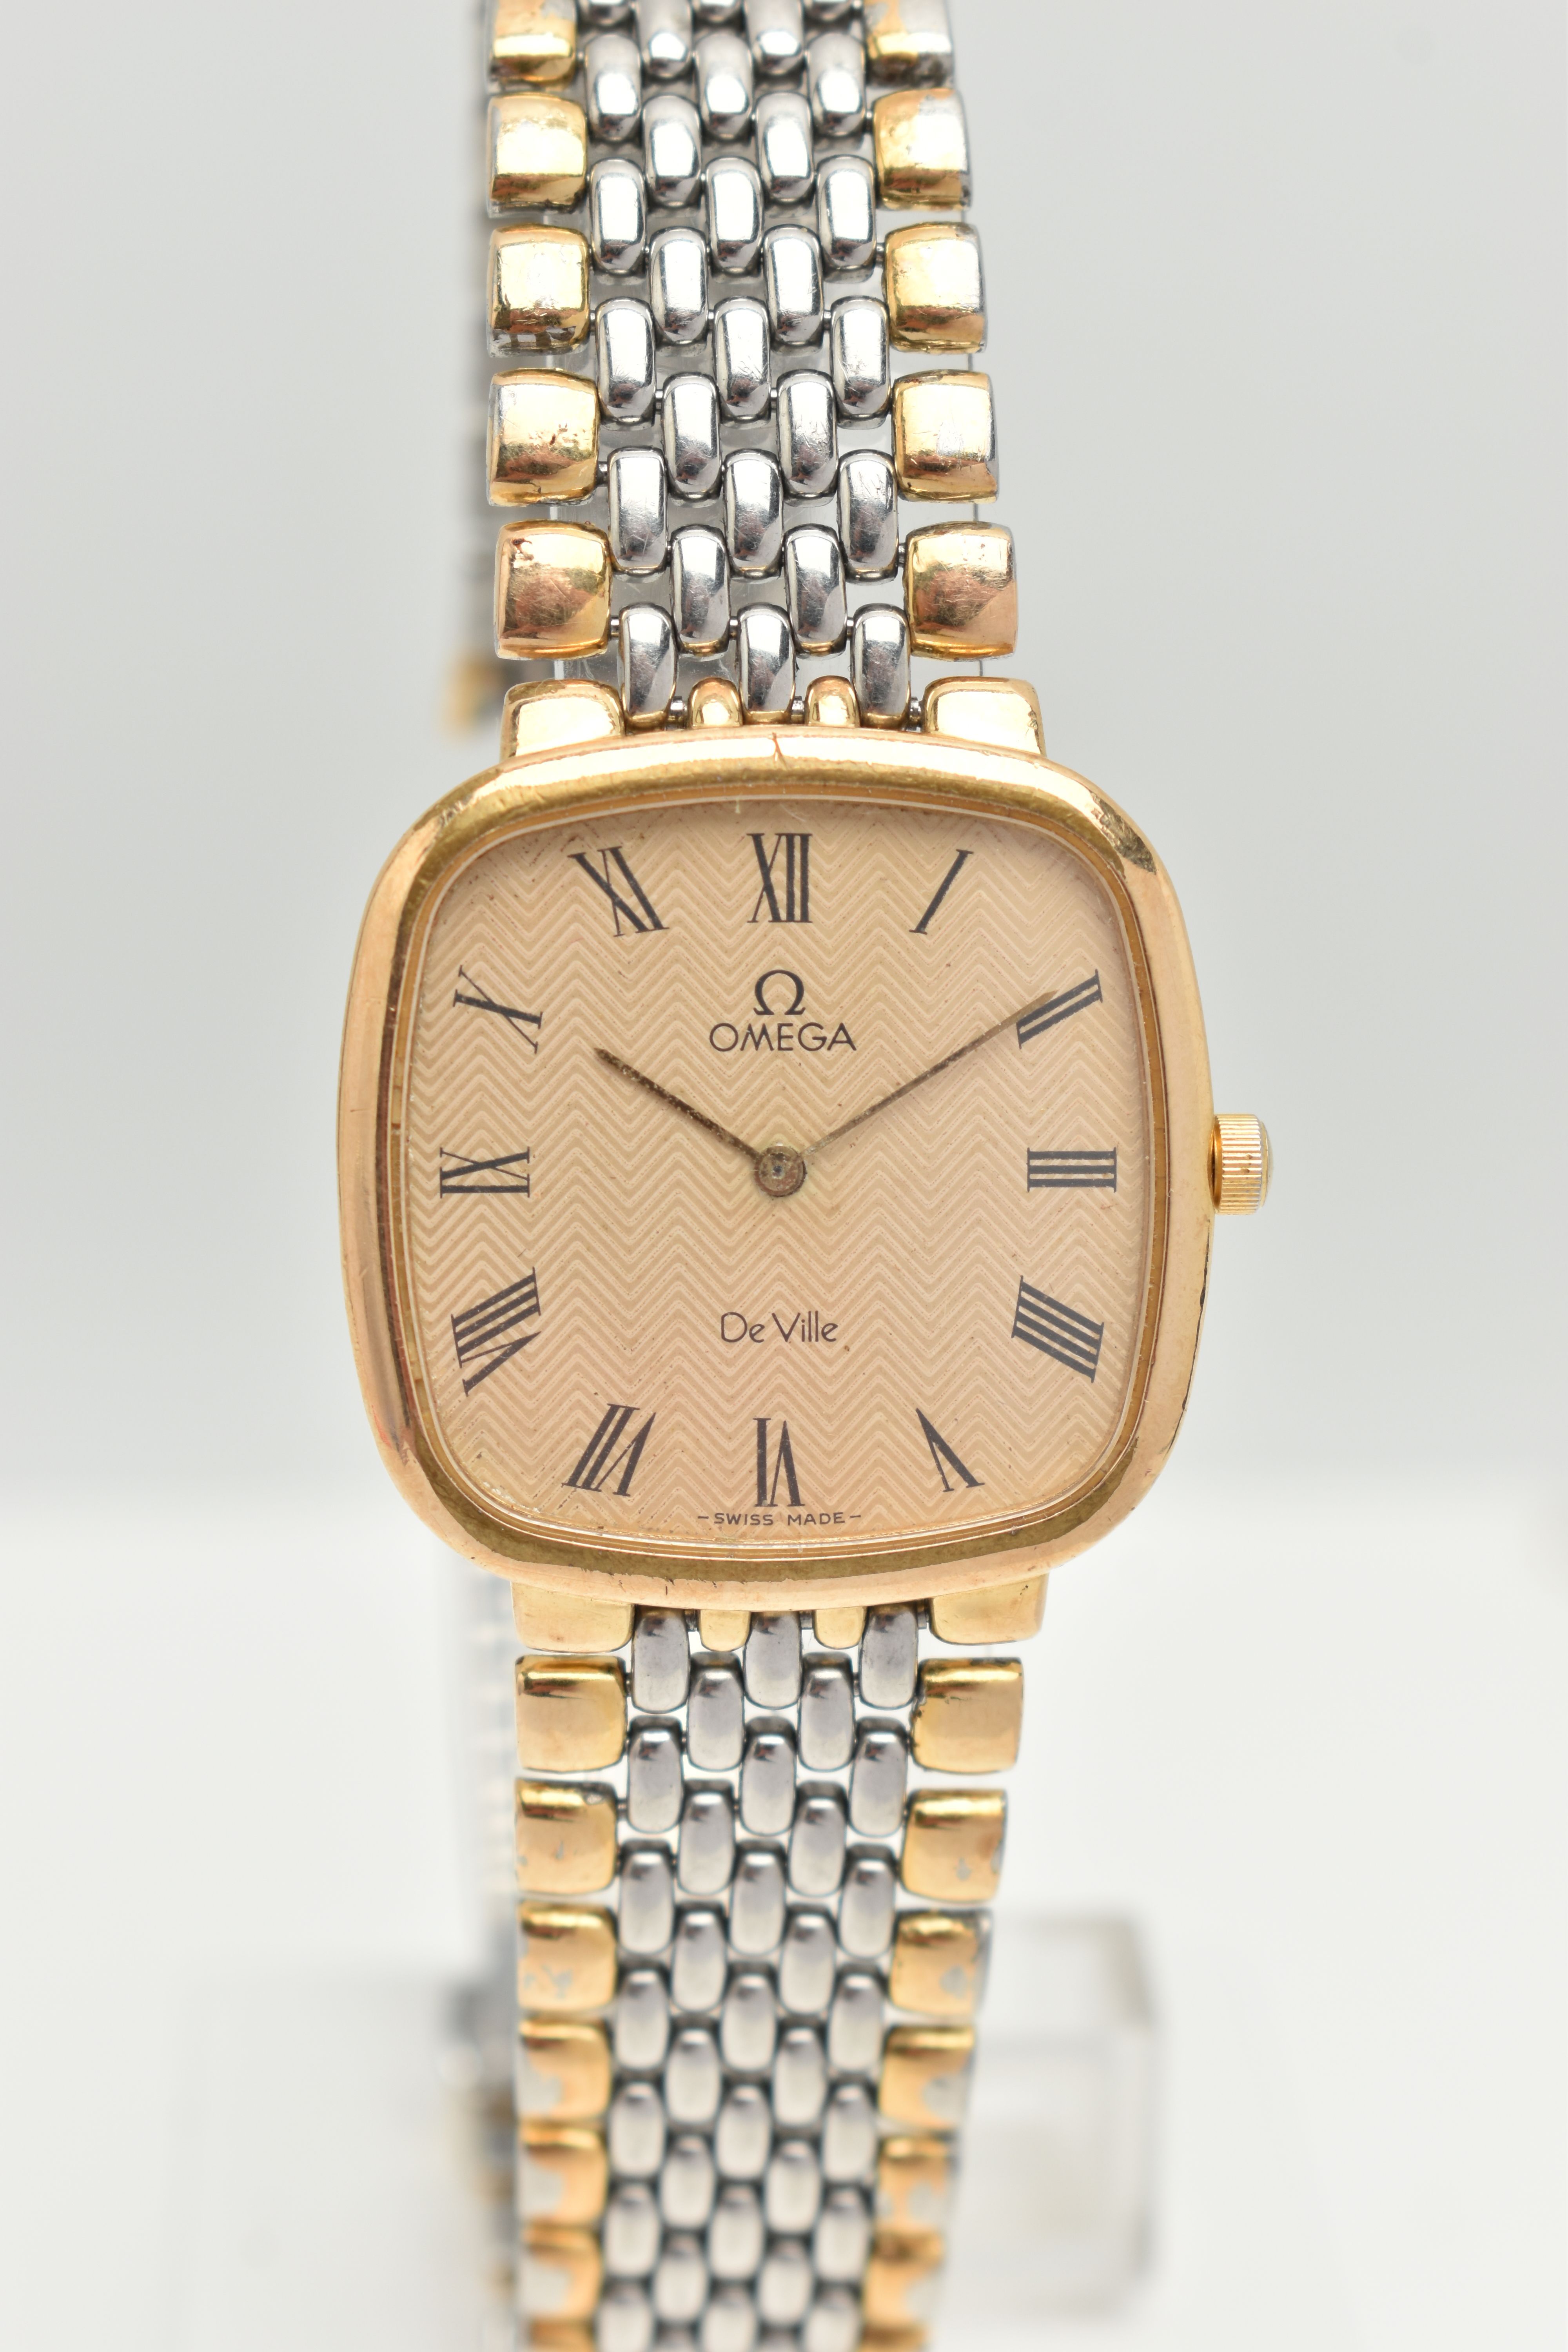 AN OMEGA DE VILLE STAINLESS STEEL WRISTWATCH, the curved square face with black Roman numerals, gold